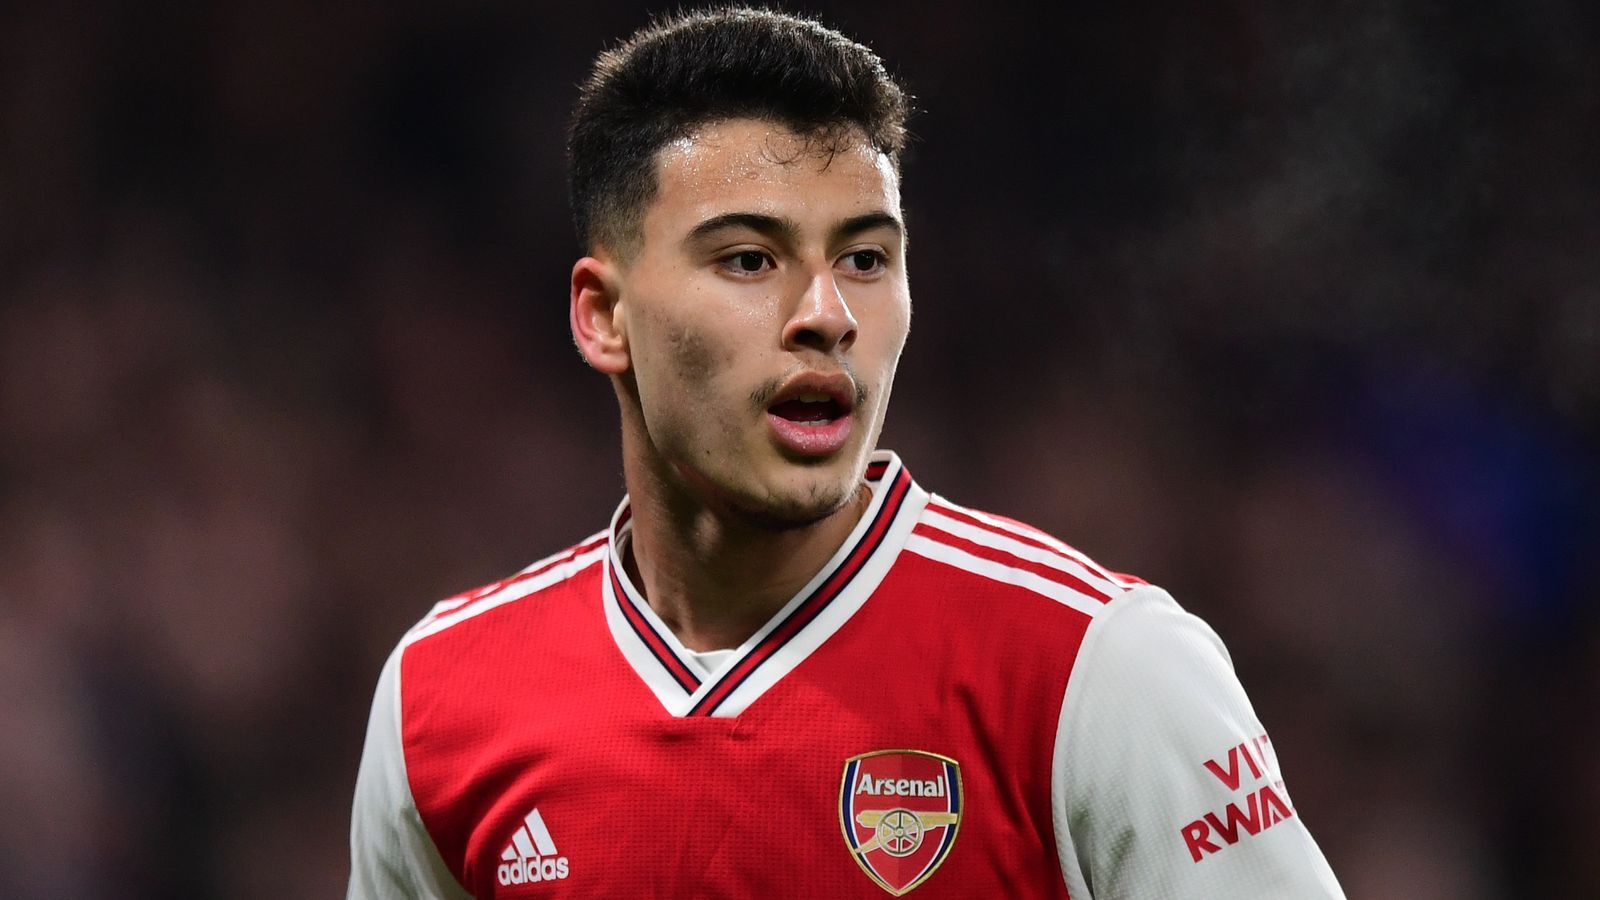 Arsenal Forward Gabriel Martinelli Will Be on the Bench for the Season